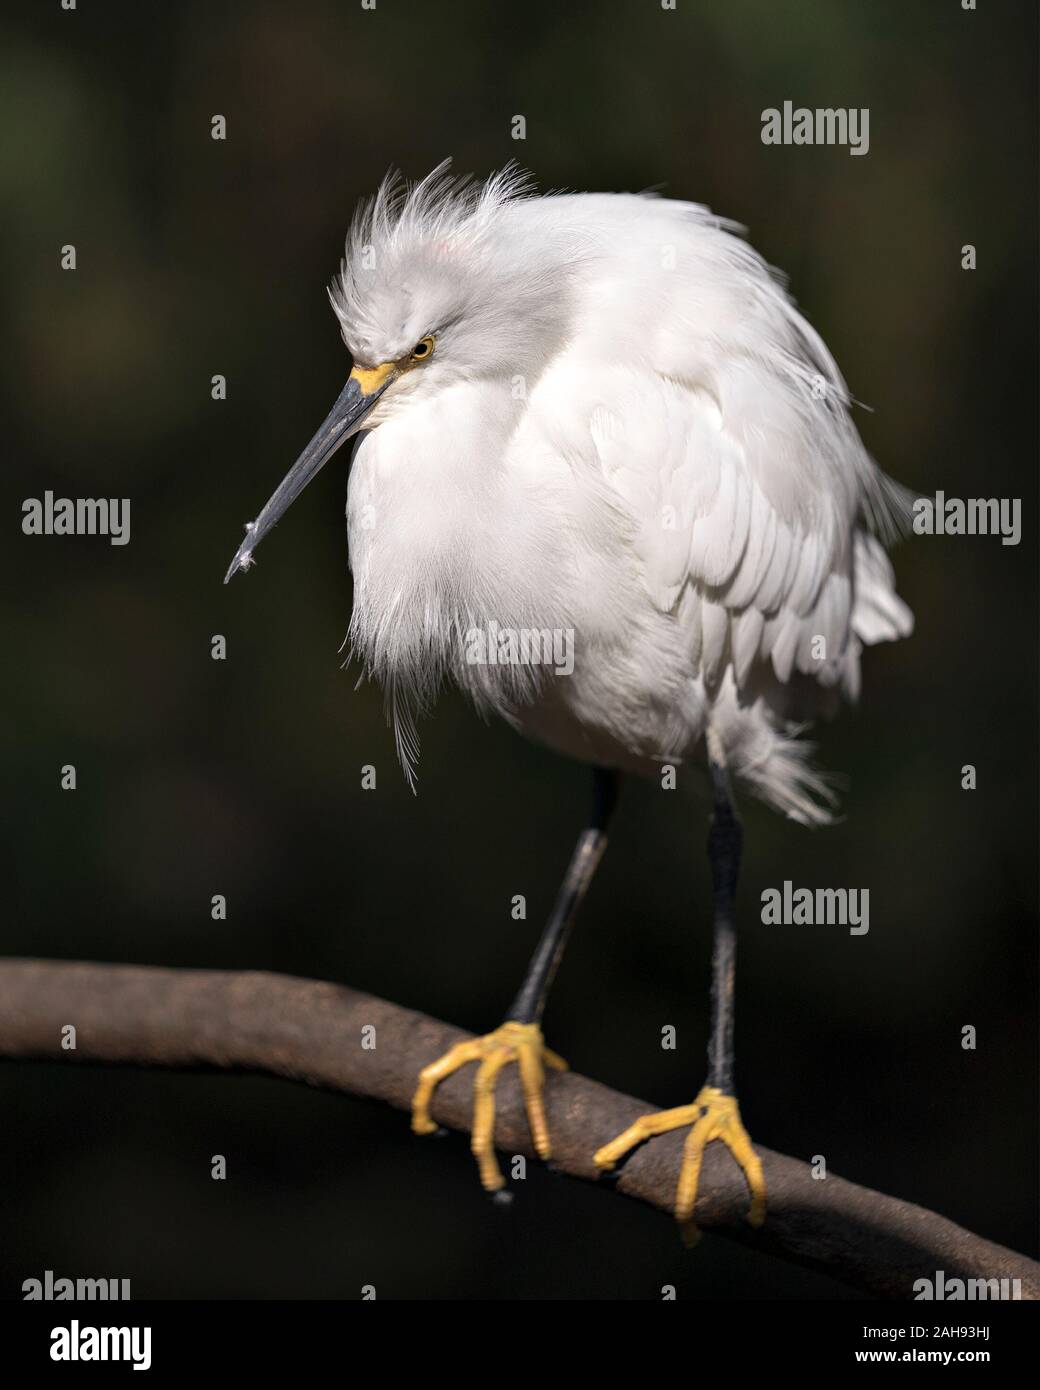 Snowy Egret bird close-up profile view,  perched on a branch, displaying white feathers, plumage, head, beak, eye, feet in its environment and surroun Stock Photo